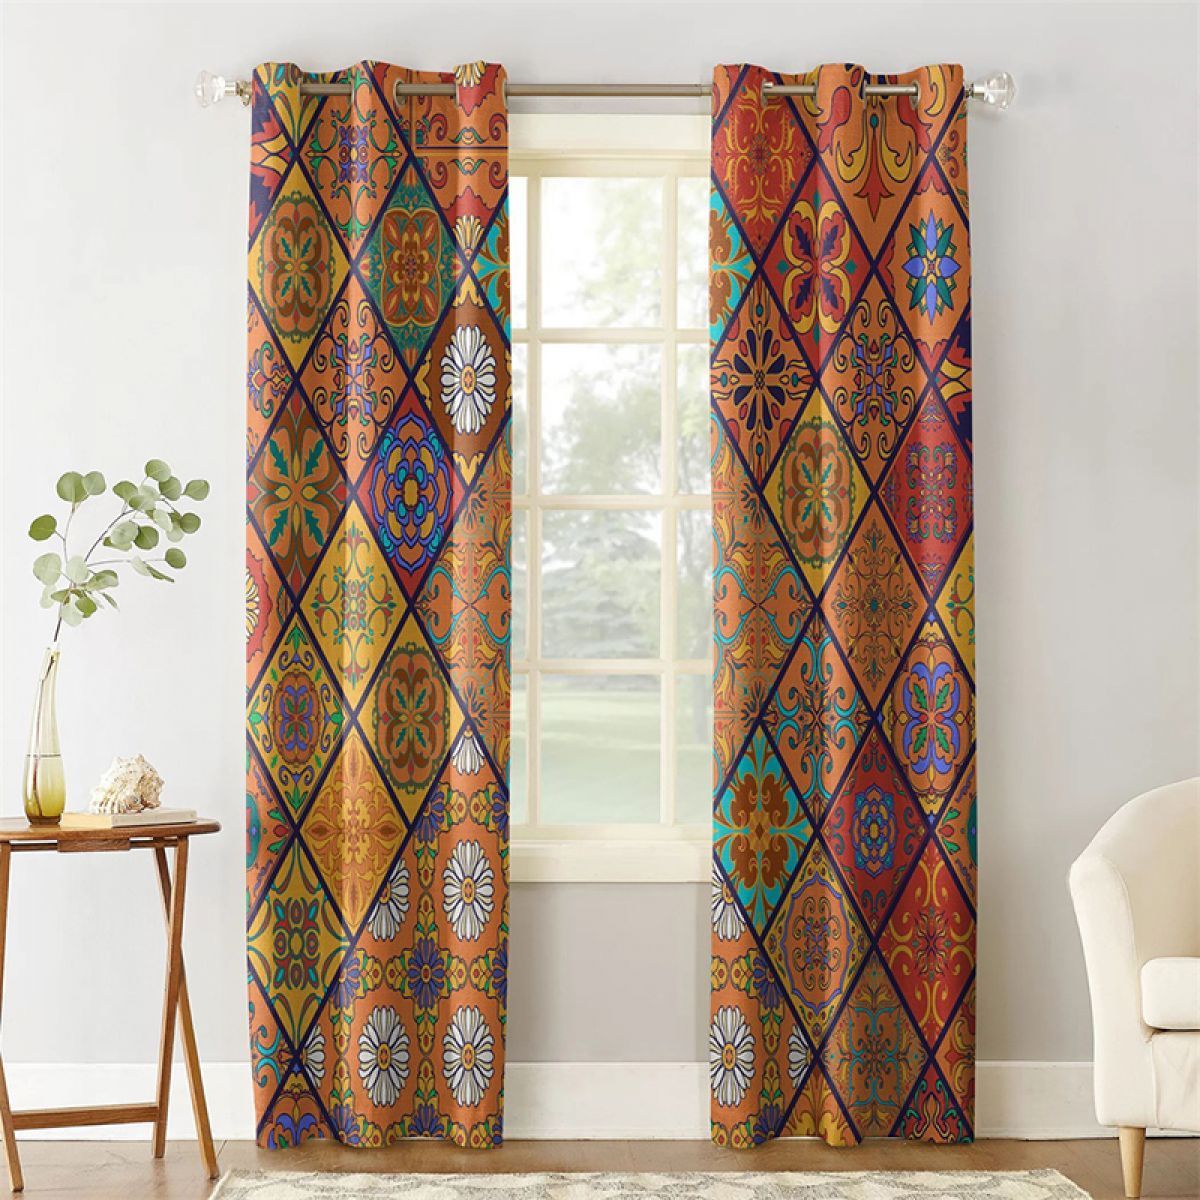 3d Rhombuses With Floral Motifs Printed Window Curtain Home Decor